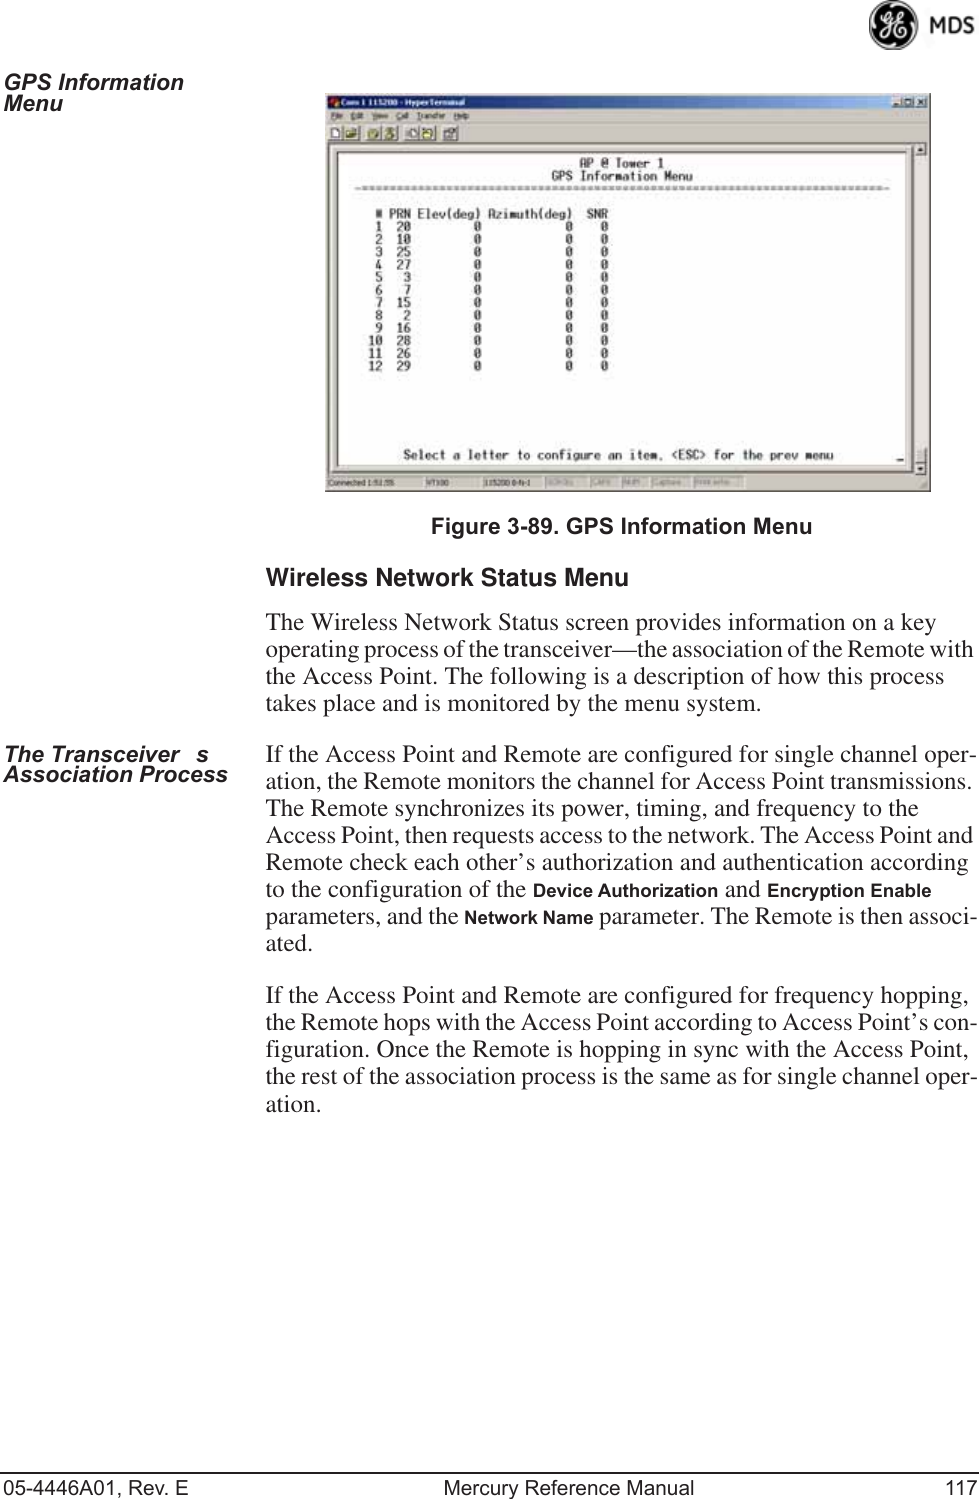 05-4446A01, Rev. E Mercury Reference Manual 117GPS Information Menu Invisible place holderFigure 3-89. GPS Information MenuWireless Network Status MenuThe Wireless Network Status screen provides information on a key operating process of the transceiver—the association of the Remote with the Access Point. The following is a description of how this process takes place and is monitored by the menu system.The Transceivers Association Process If the Access Point and Remote are configured for single channel oper-ation, the Remote monitors the channel for Access Point transmissions. The Remote synchronizes its power, timing, and frequency to the Access Point, then requests access to the network. The Access Point and Remote check each other’s authorization and authentication according to the configuration of the Device Authorization and Encryption Enable parameters, and the Network Name parameter. The Remote is then associ-ated.If the Access Point and Remote are configured for frequency hopping, the Remote hops with the Access Point according to Access Point’s con-figuration. Once the Remote is hopping in sync with the Access Point, the rest of the association process is the same as for single channel oper-ation. 